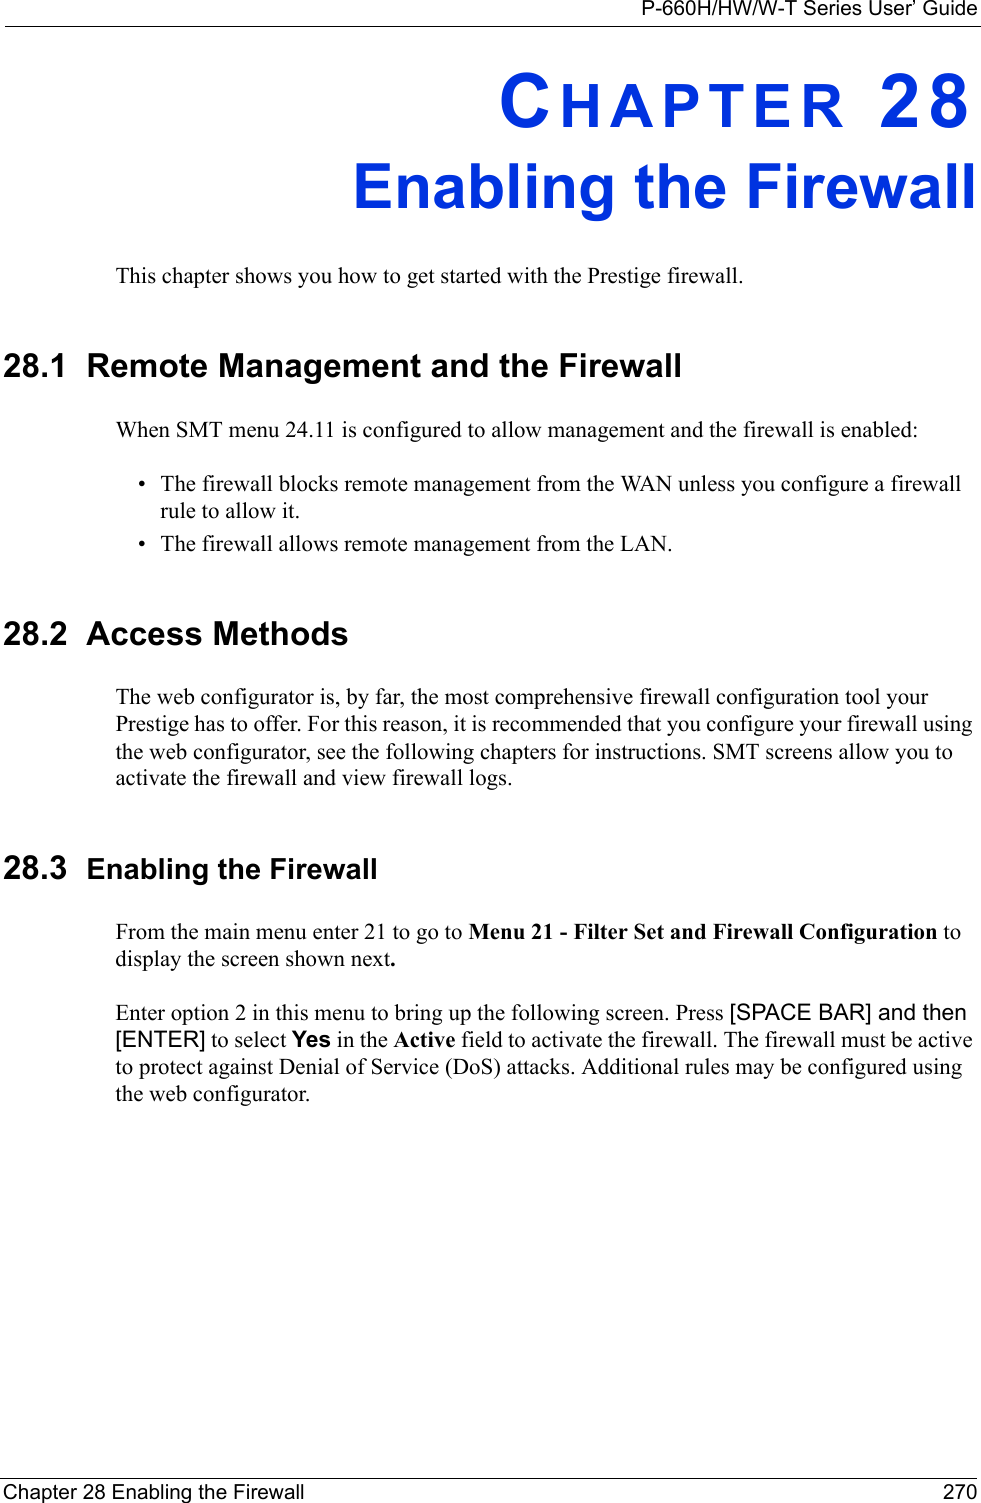 P-660H/HW/W-T Series User’ GuideChapter 28 Enabling the Firewall 270CHAPTER 28Enabling the FirewallThis chapter shows you how to get started with the Prestige firewall.28.1  Remote Management and the FirewallWhen SMT menu 24.11 is configured to allow management and the firewall is enabled:• The firewall blocks remote management from the WAN unless you configure a firewall rule to allow it.• The firewall allows remote management from the LAN. 28.2  Access MethodsThe web configurator is, by far, the most comprehensive firewall configuration tool your Prestige has to offer. For this reason, it is recommended that you configure your firewall using the web configurator, see the following chapters for instructions. SMT screens allow you to activate the firewall and view firewall logs. 28.3  Enabling the FirewallFrom the main menu enter 21 to go to Menu 21 - Filter Set and Firewall Configuration to display the screen shown next.Enter option 2 in this menu to bring up the following screen. Press [SPACE BAR] and then [ENTER] to select Yes in the Active field to activate the firewall. The firewall must be active to protect against Denial of Service (DoS) attacks. Additional rules may be configured using the web configurator.